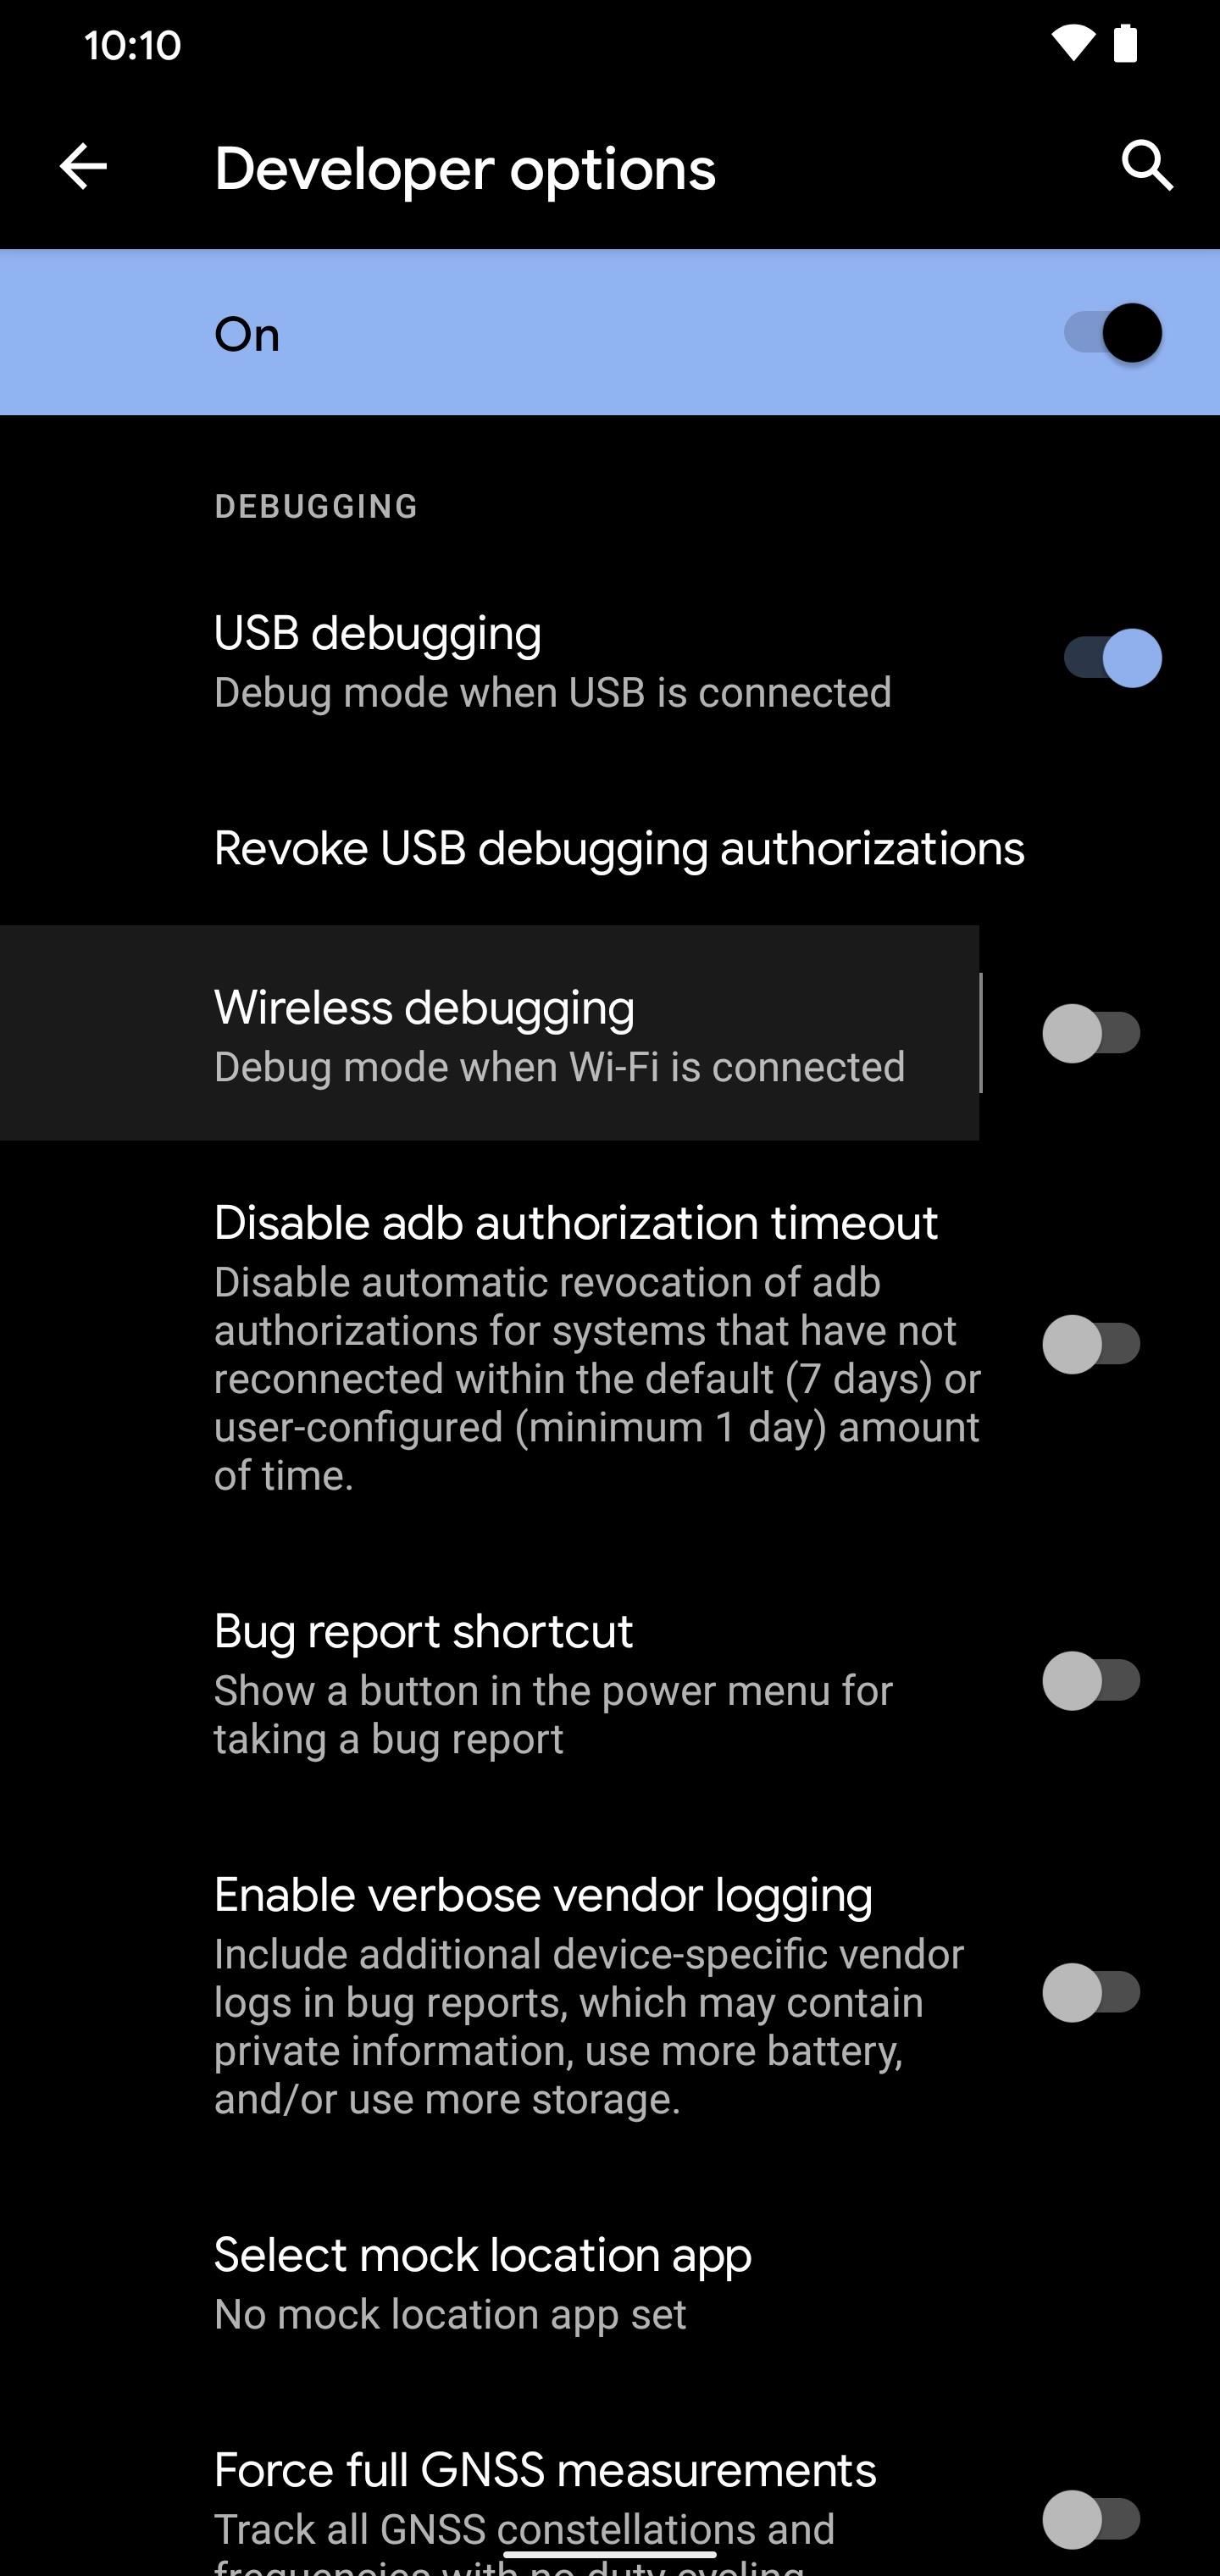 How to Enable Wireless Debugging on Android 11 to Send ADB Commands Without a USB Cable